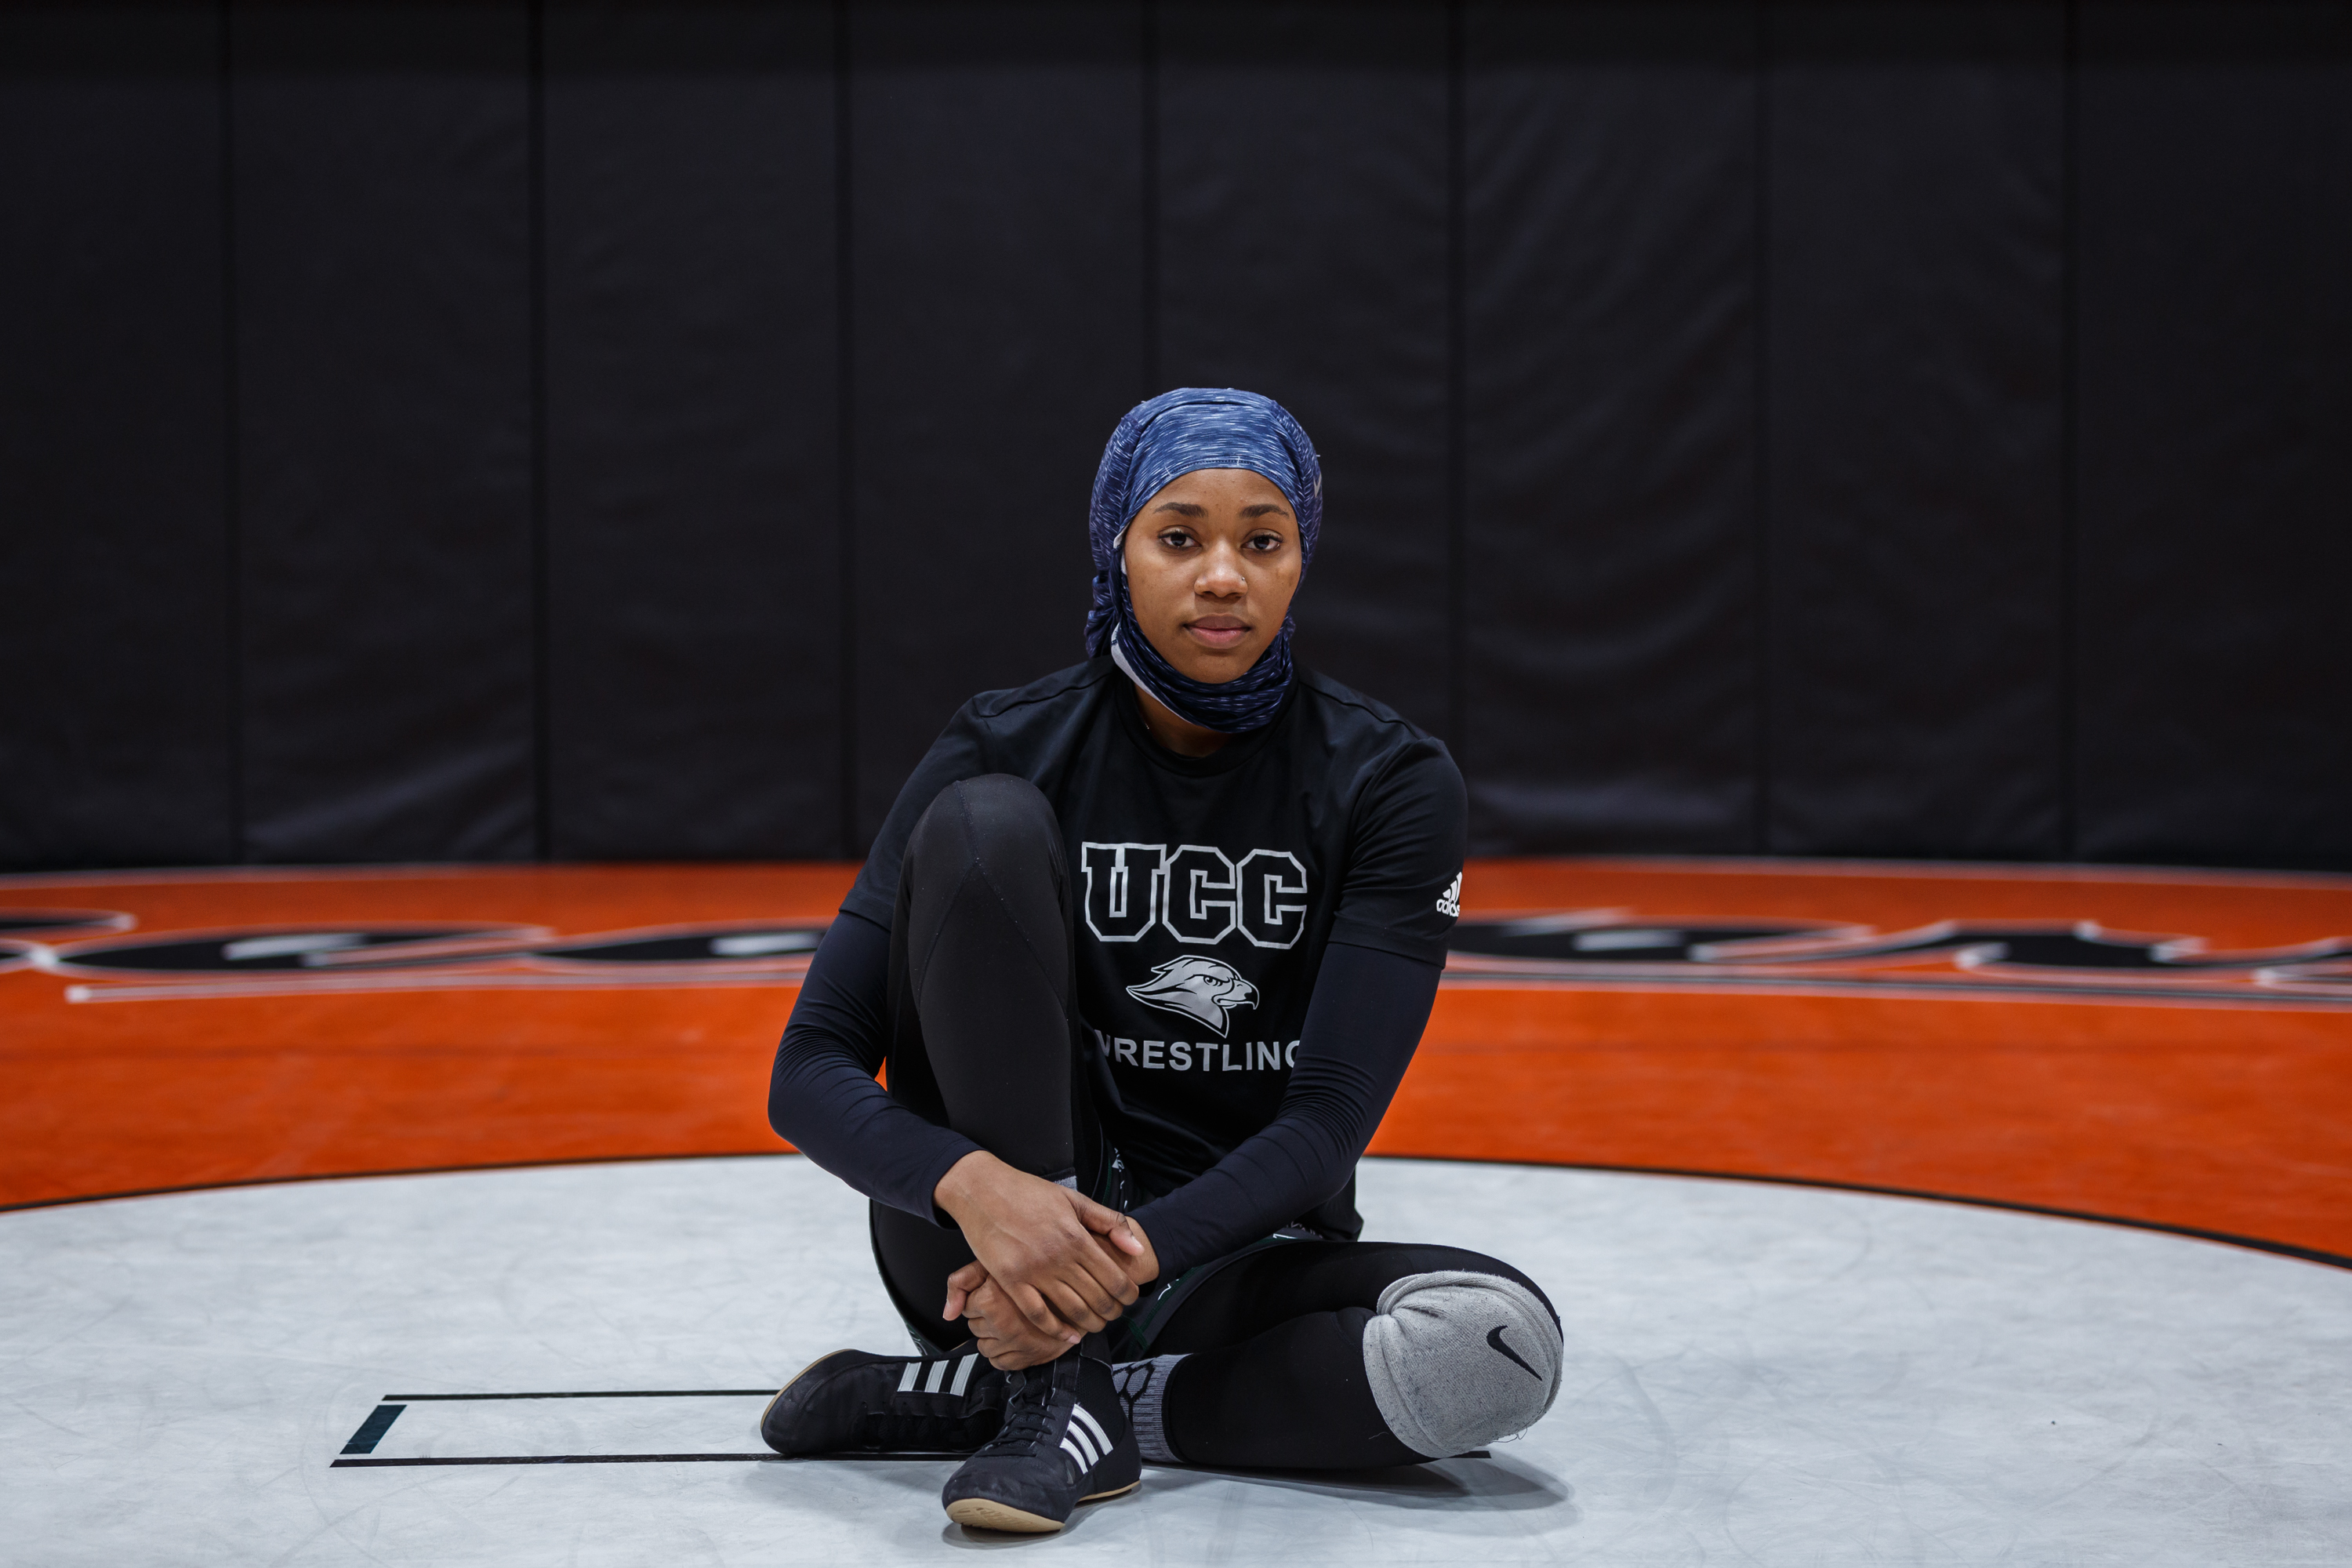 Muslim Women Wrestlers Say They Face Discrimination HuffPost Women photo picture